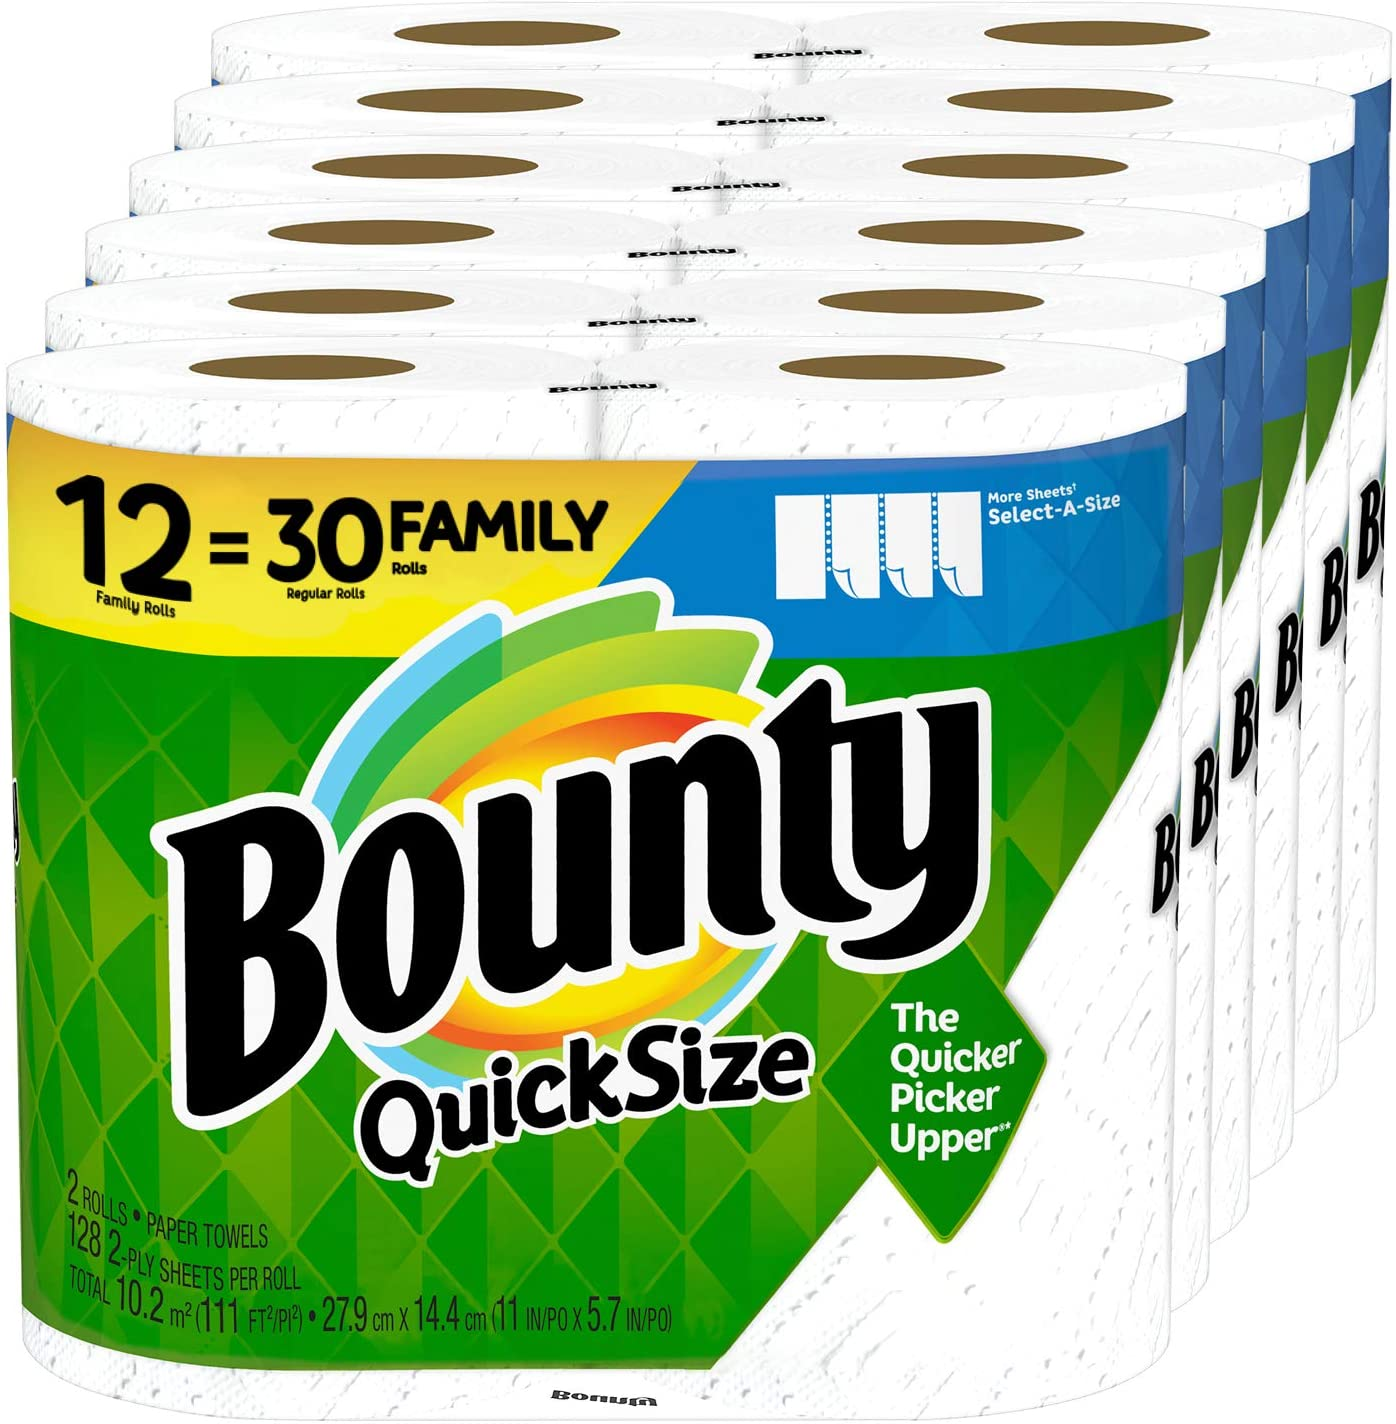 Quick-Size Paper Towels, White, 12 Family Rolls = 30 Regular Rolls